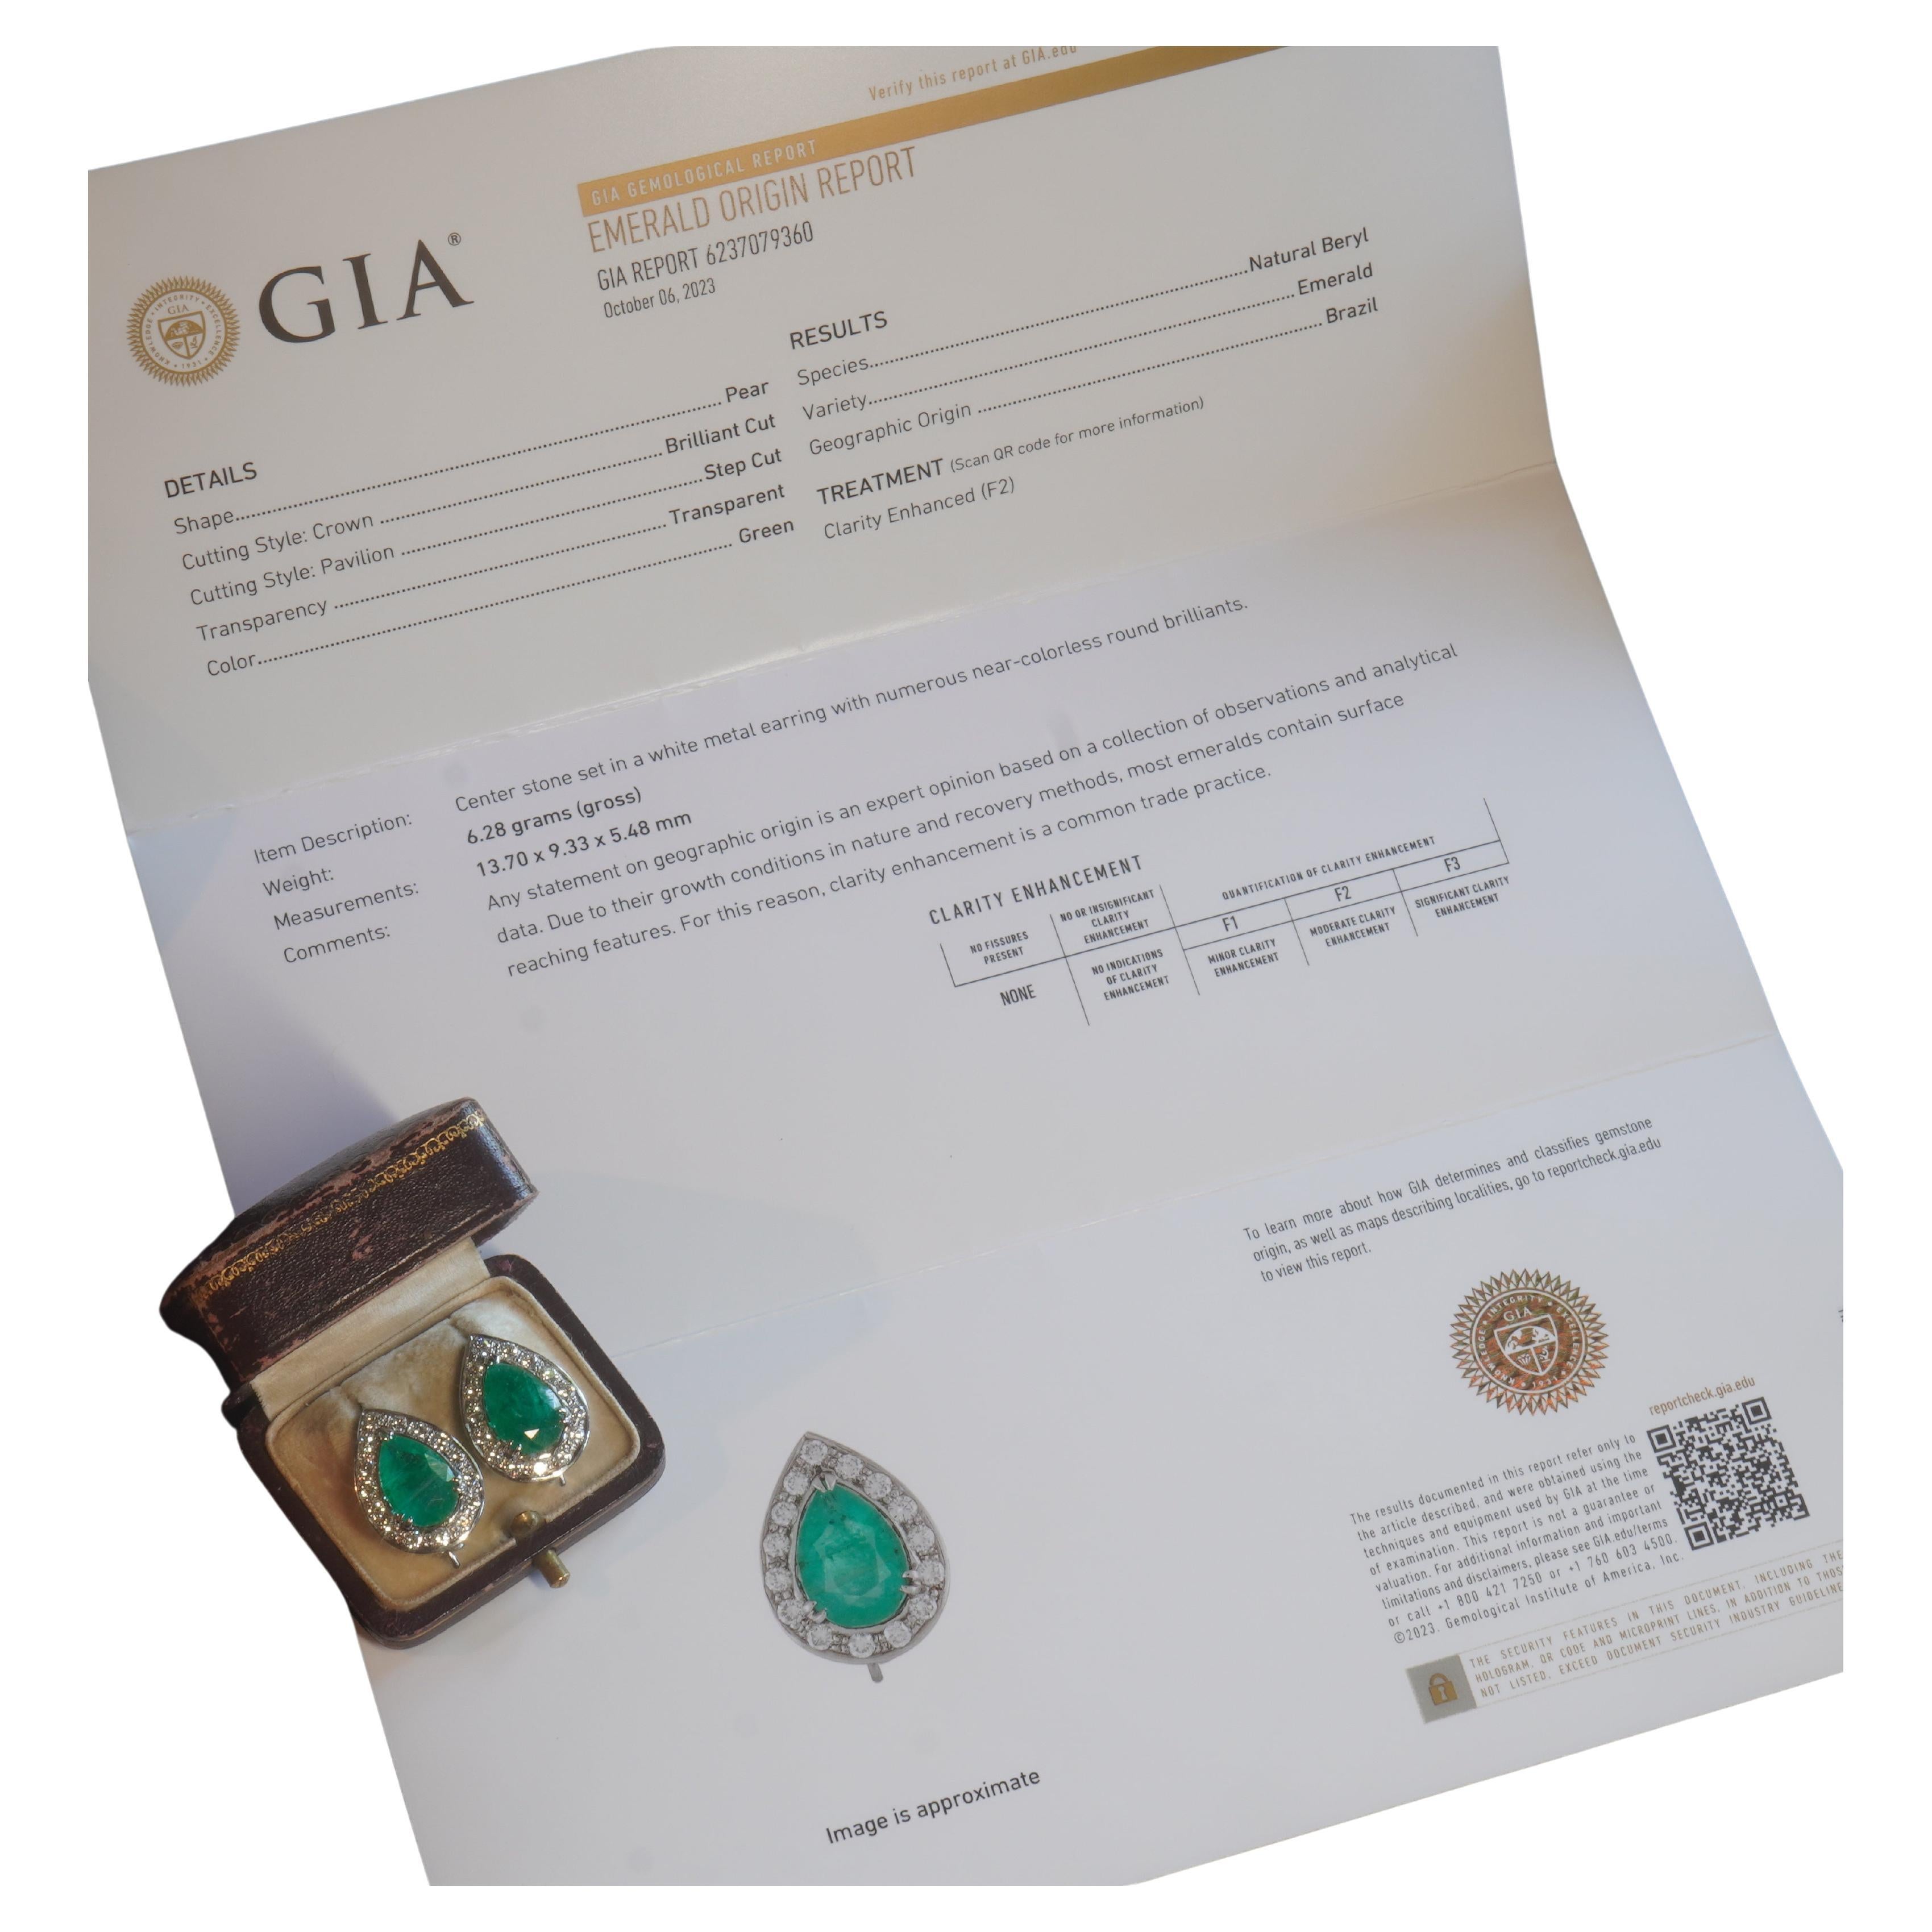 Old South Jewels proudly presents...Luxury. Vintage GIA Certified 10.42 Carat Emerald & Diamond Vintage Earrings & Box. Brilliant Green Transparent 8.02 Carat Natural Emeralds are Crowned with 2.40 Carats of Sparkling White Diamonds. Fine Antique